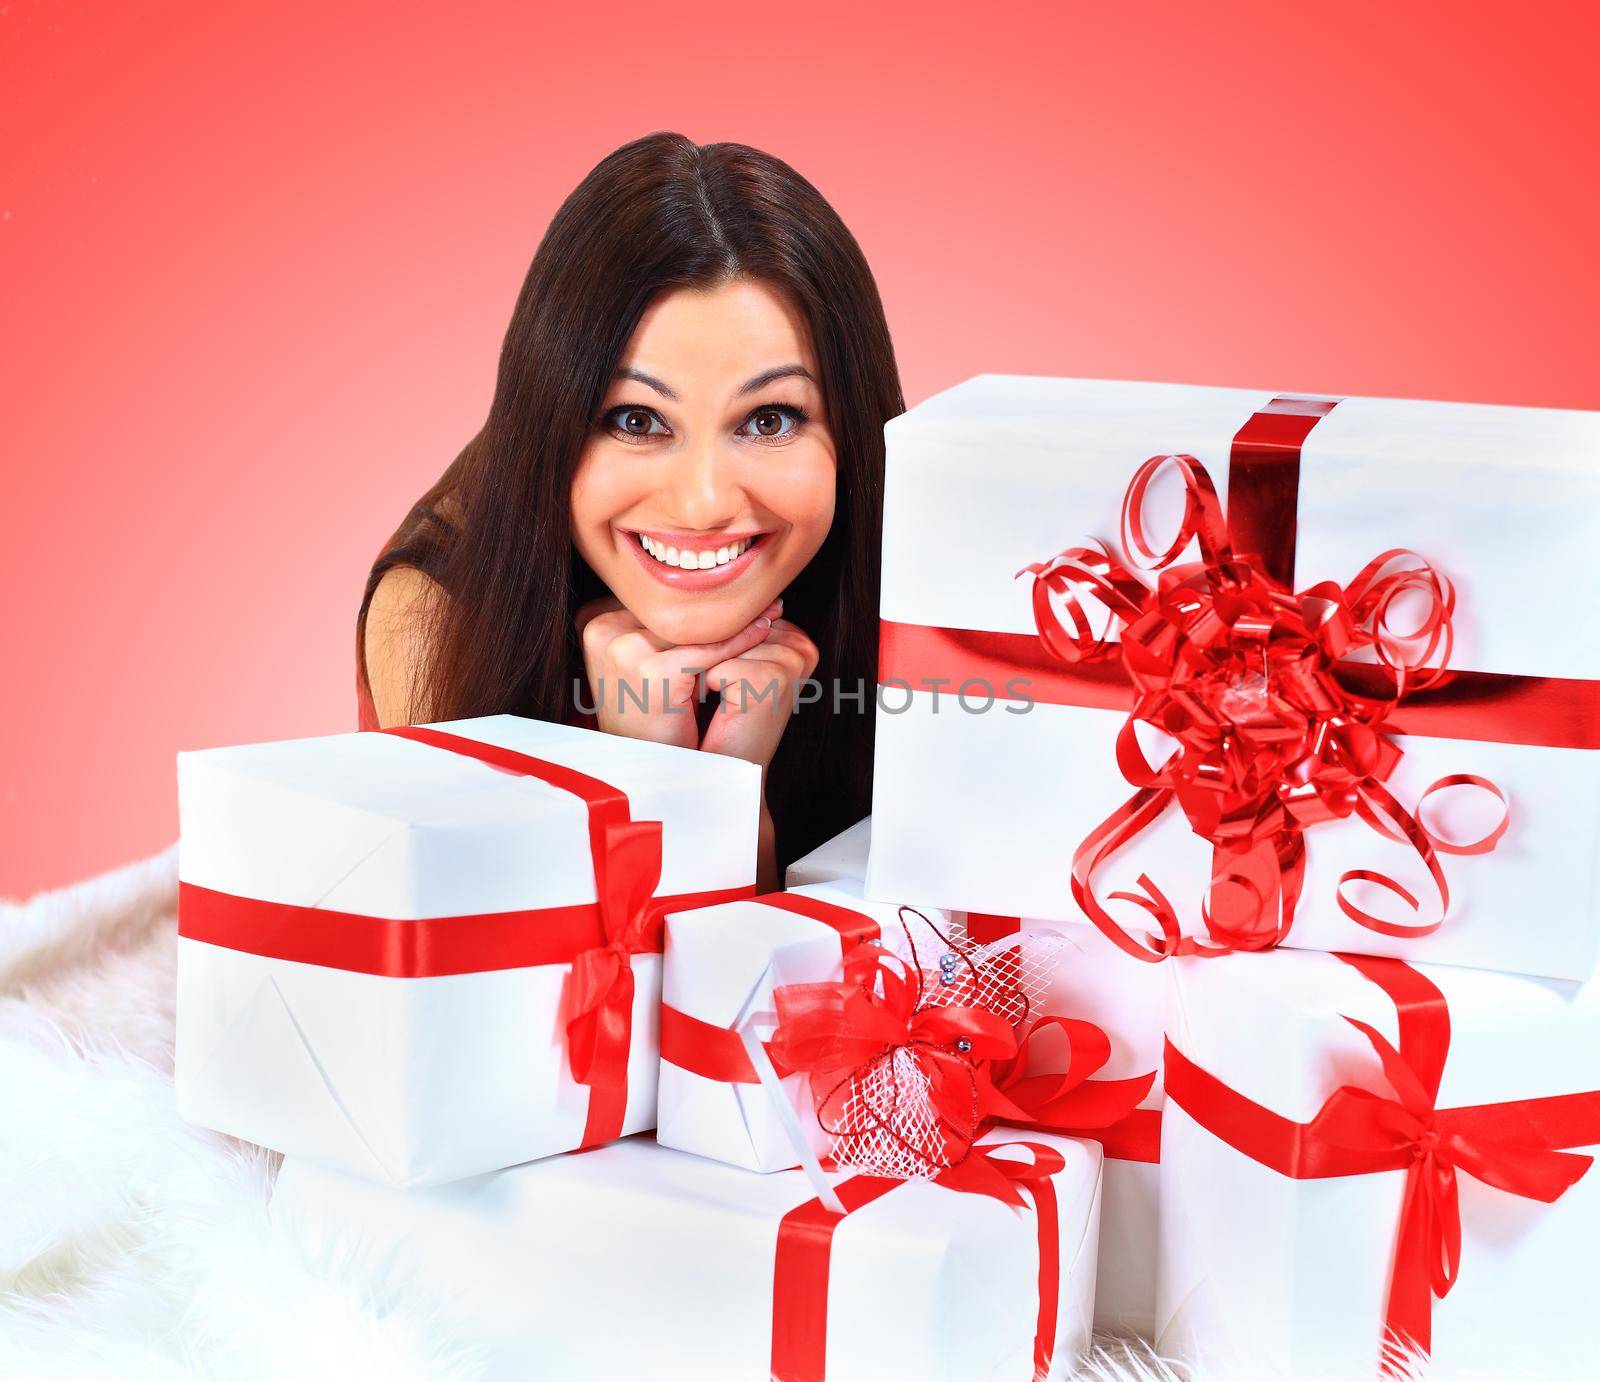 Young happy woman with a gift